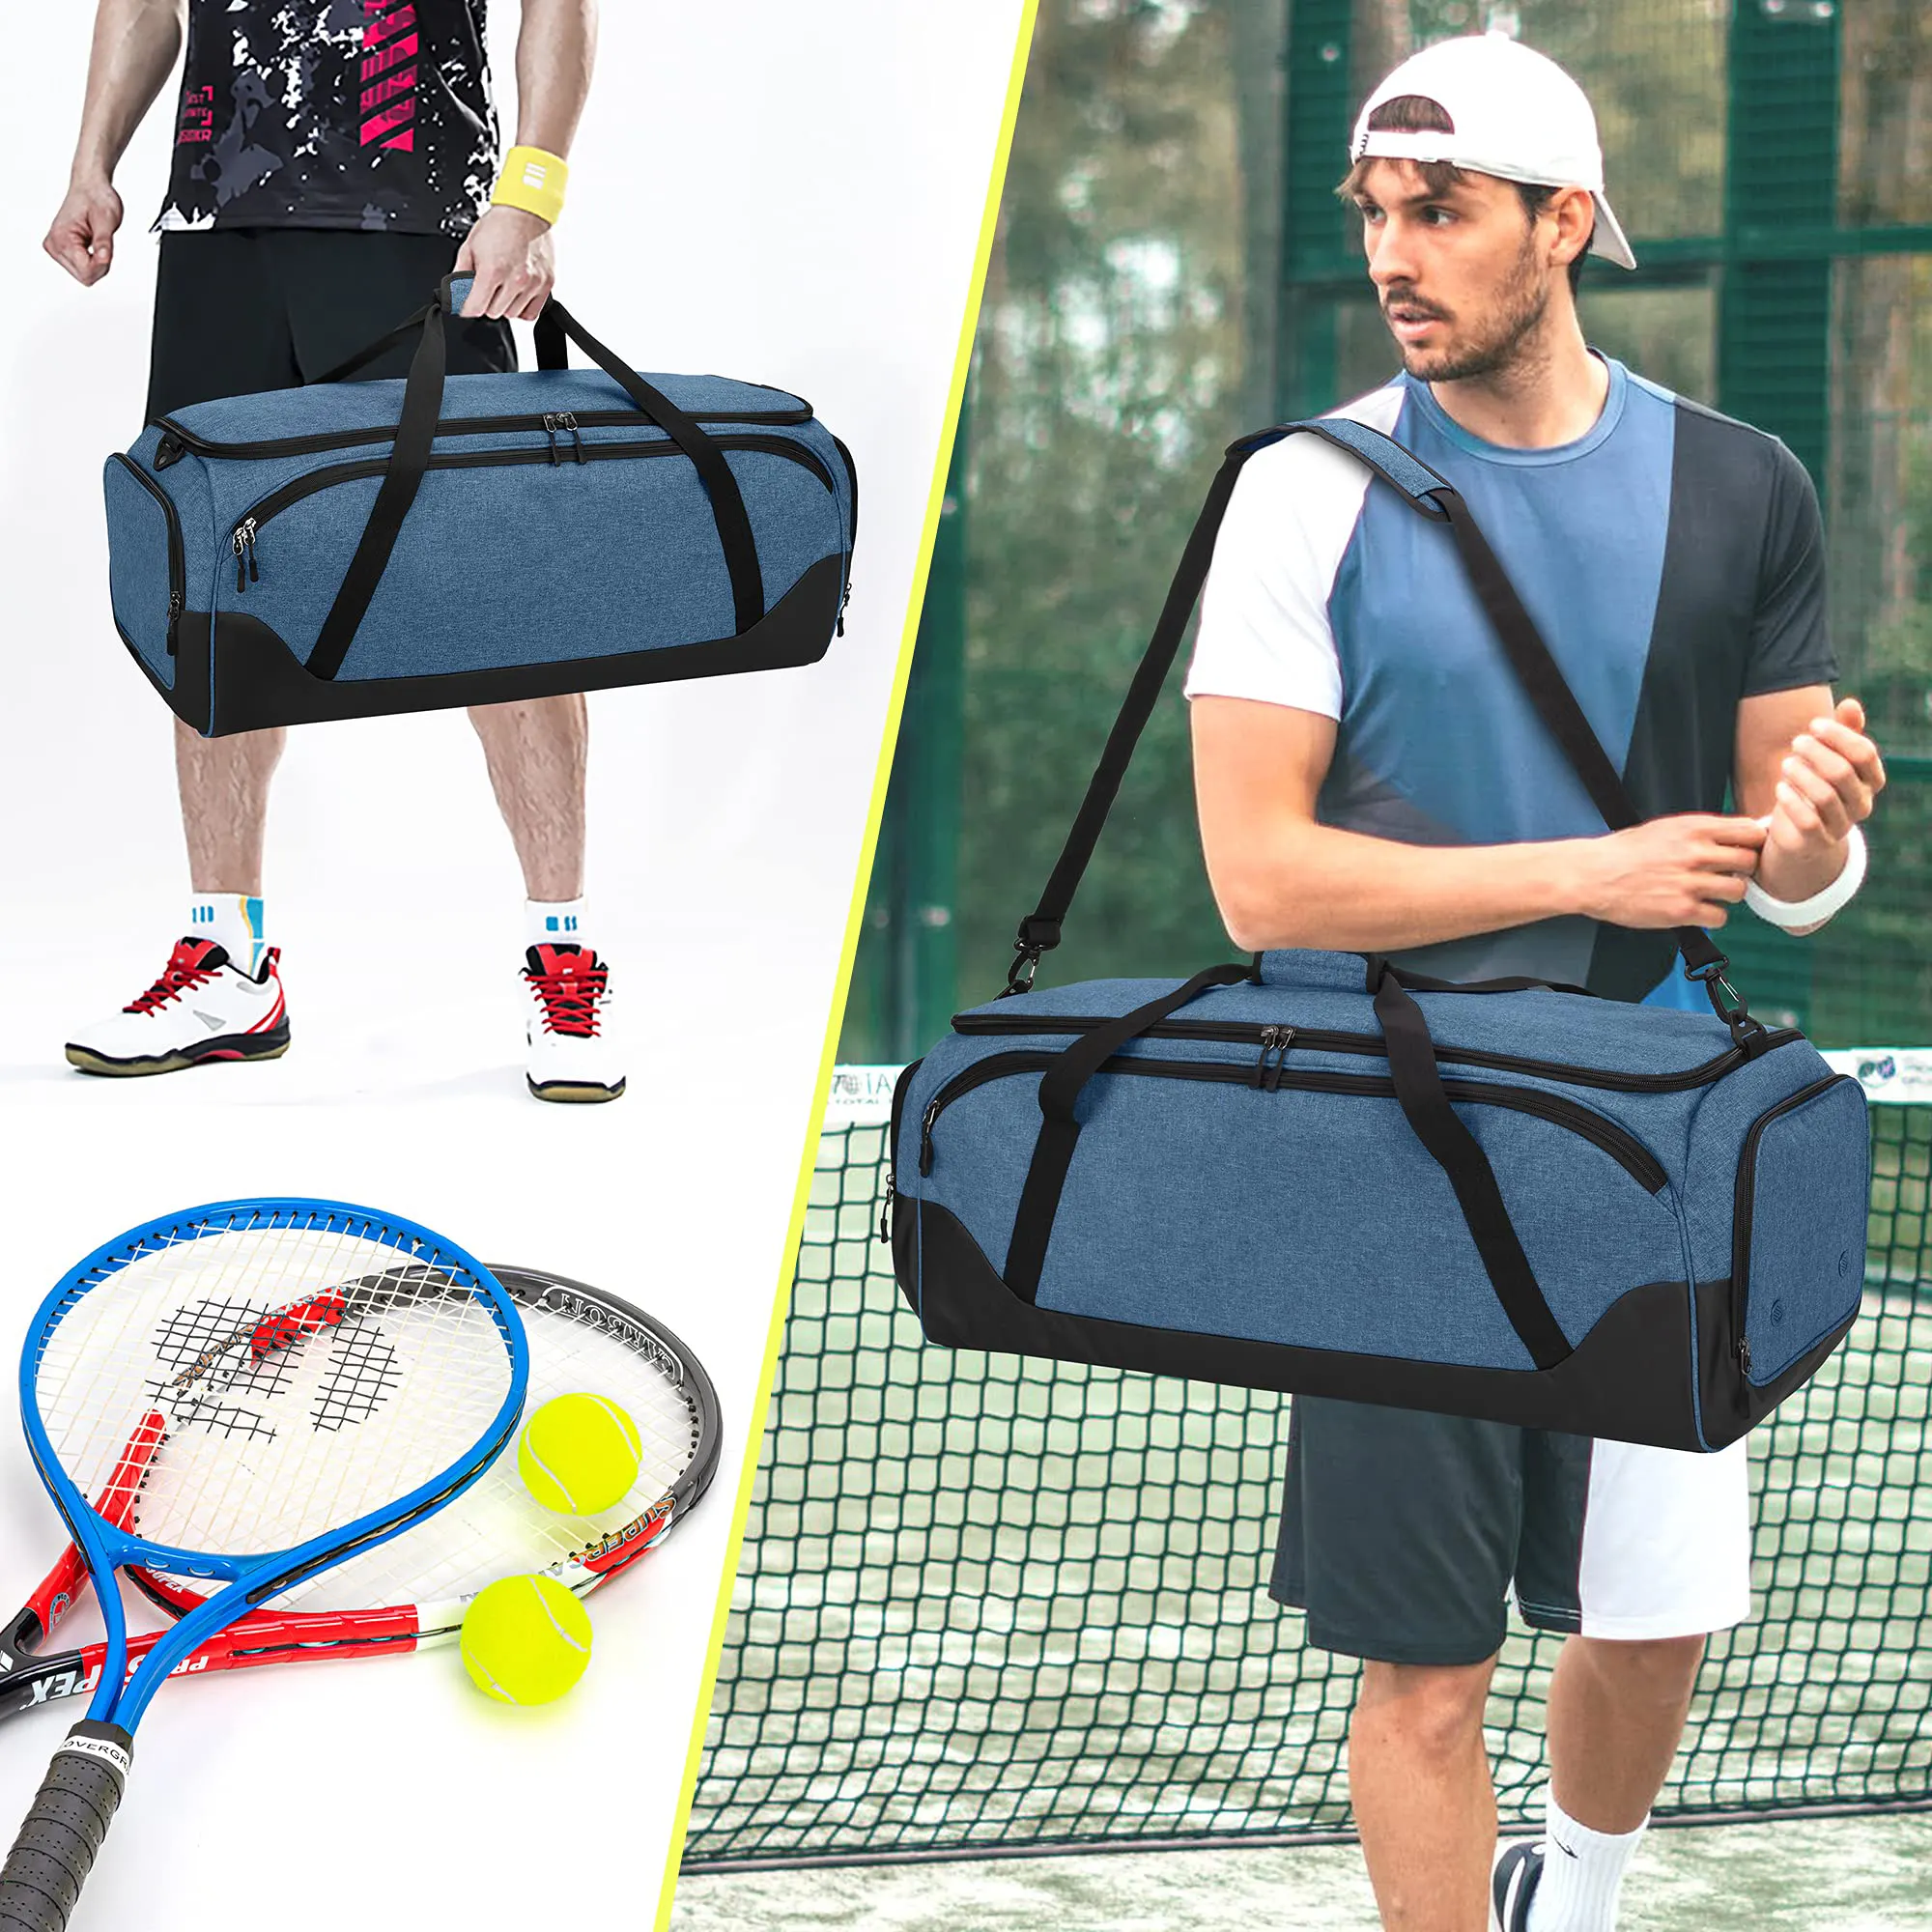 Tennis Racket Bag Holds 8 Rackets, Tennis Duffle Bag with Separate Ventilated Shoe Compartment Up to Mens